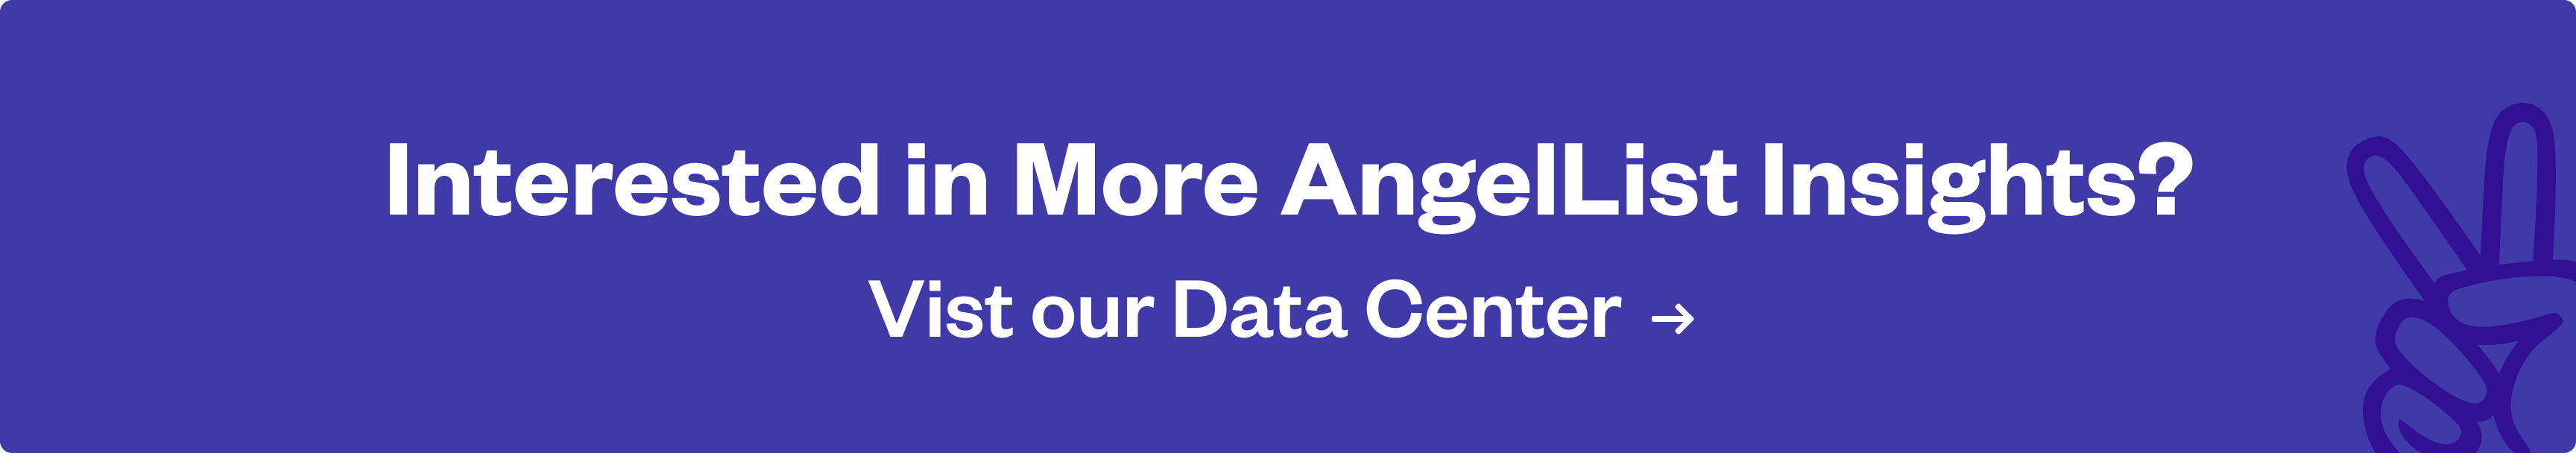 visit our data center